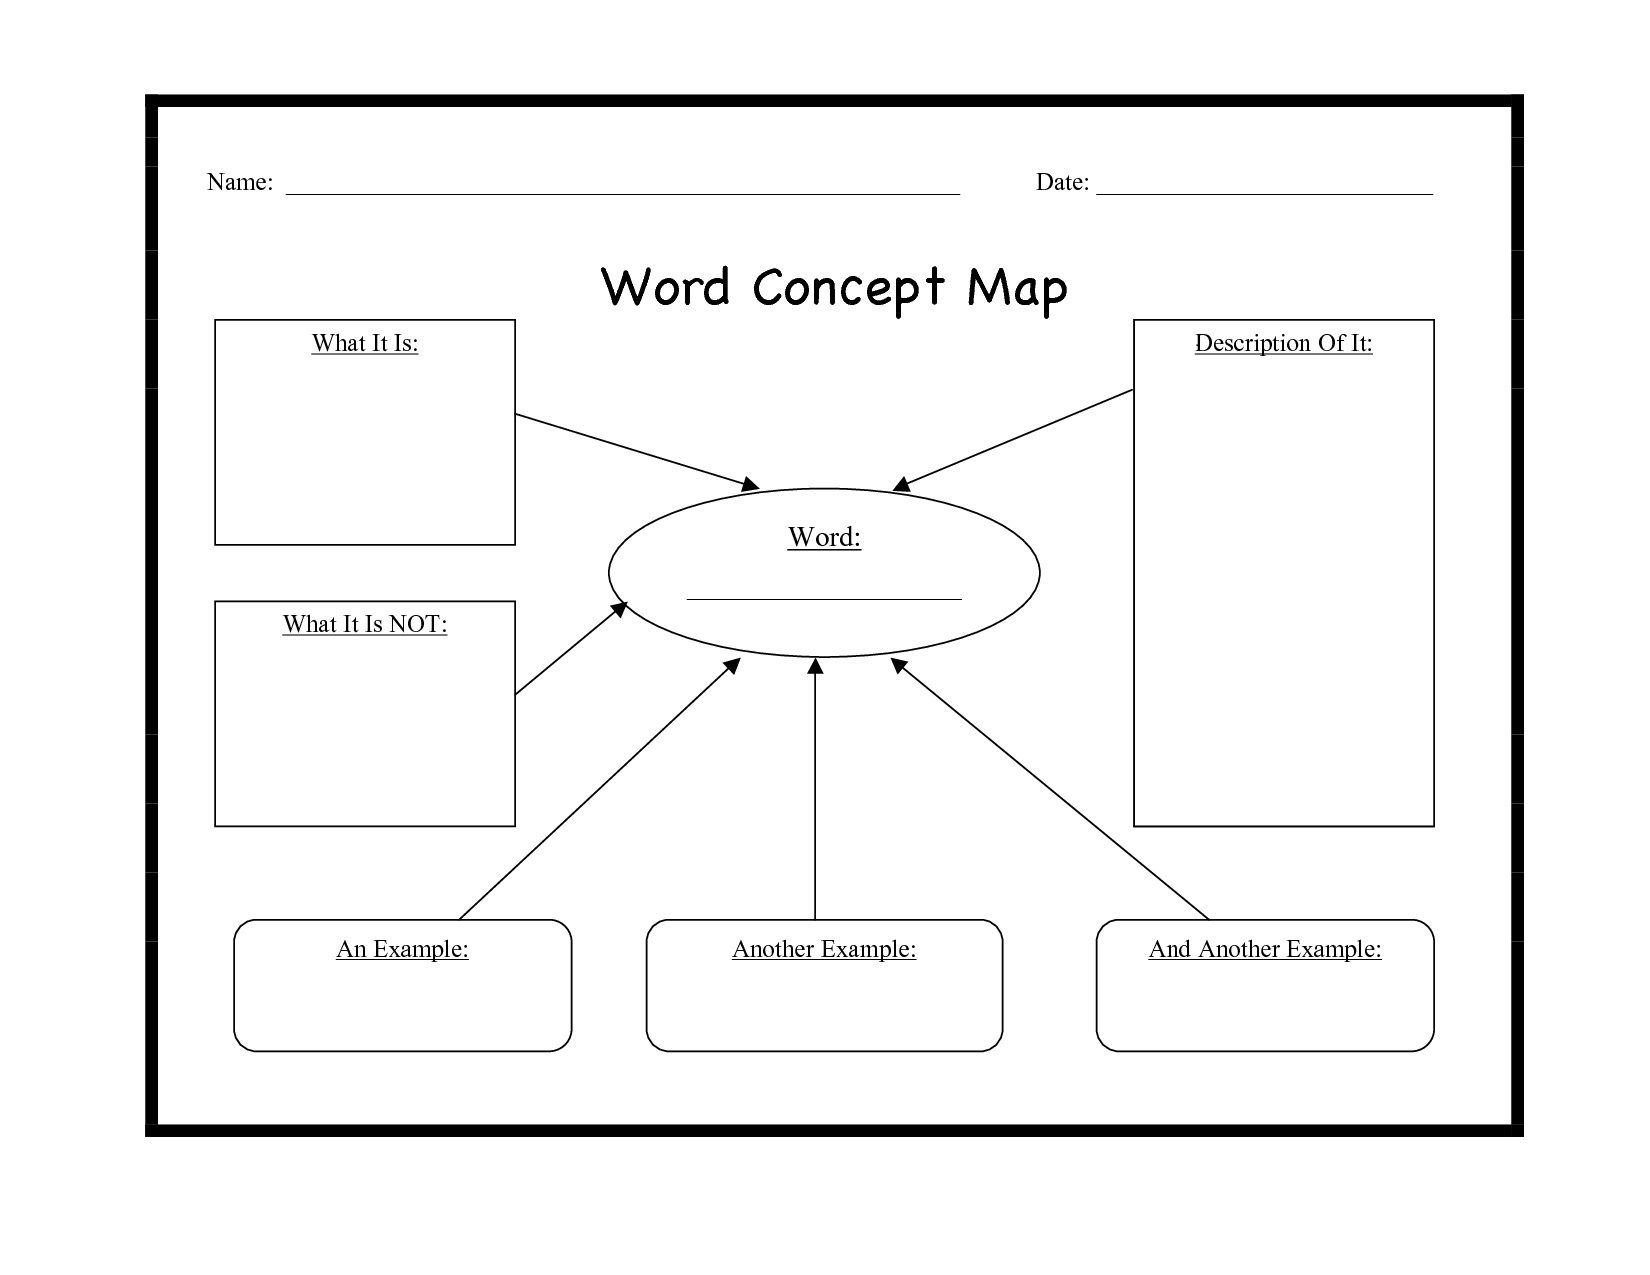 Word Concept Map Visual Aid Students Can Use This Graphic Organizer To Align New Words To Words And Concepts T Concept Map Template Concept Map Thinking Maps